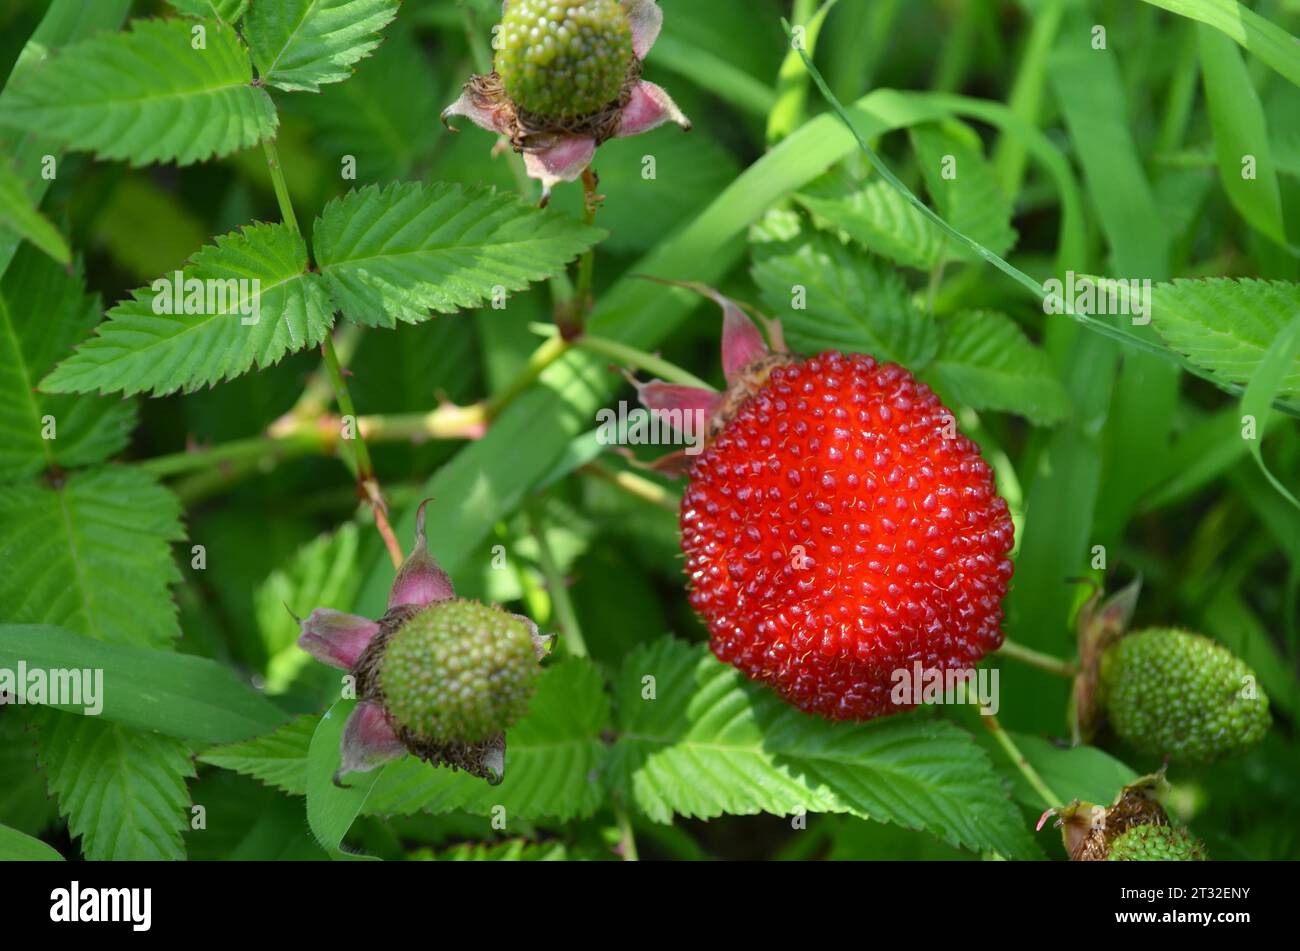 Ripe red Tibetan raspberry against a background of green leaves close-up. The concept of growing your own organic food. Stock Photo